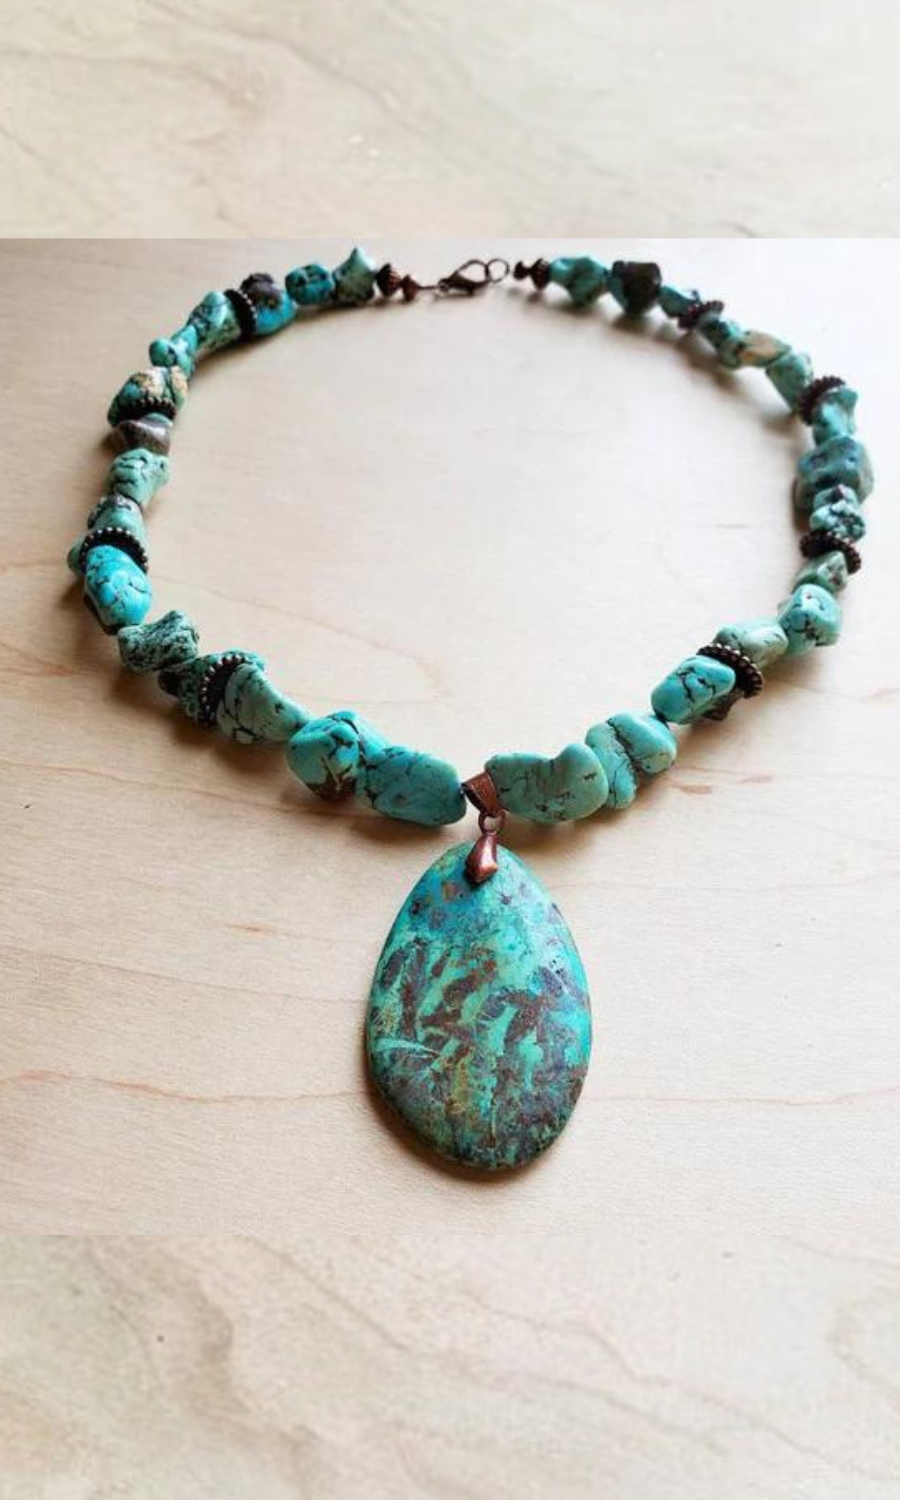 Chunky Turquoise Necklace Teardrop Pendant